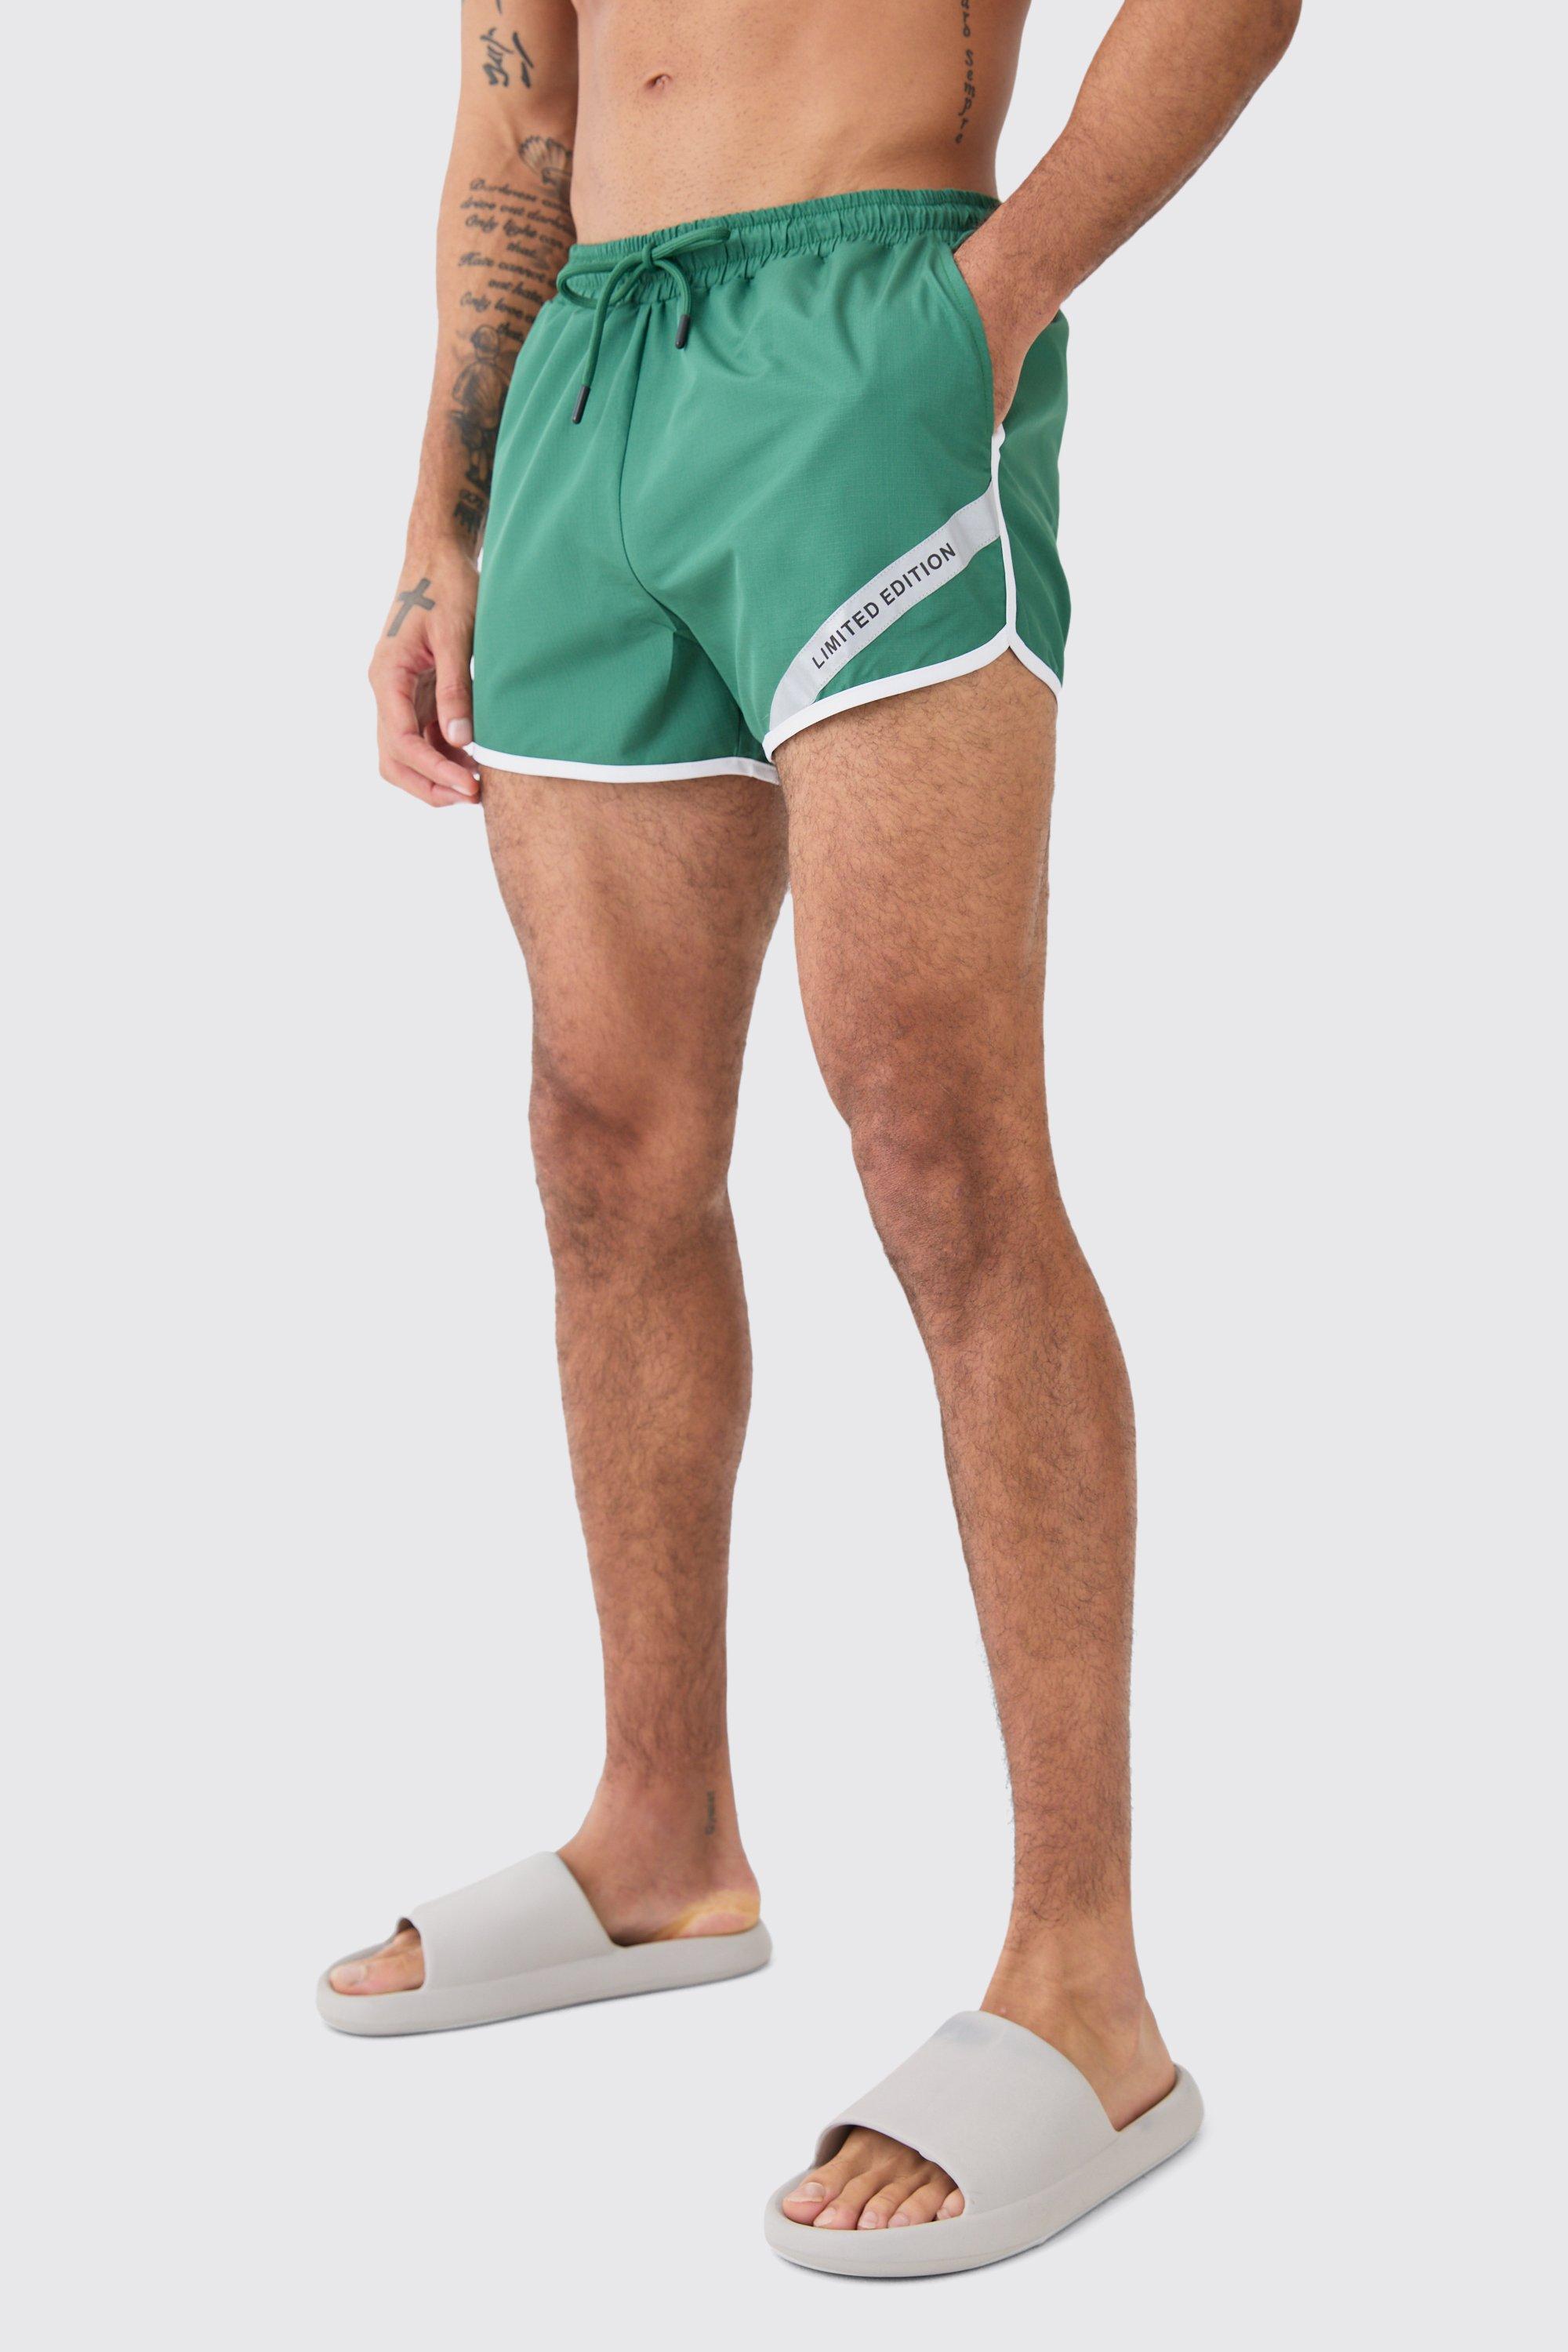 Image of Costume a pantaloncino in nylon ripstop Runner Limited Edition, Verde